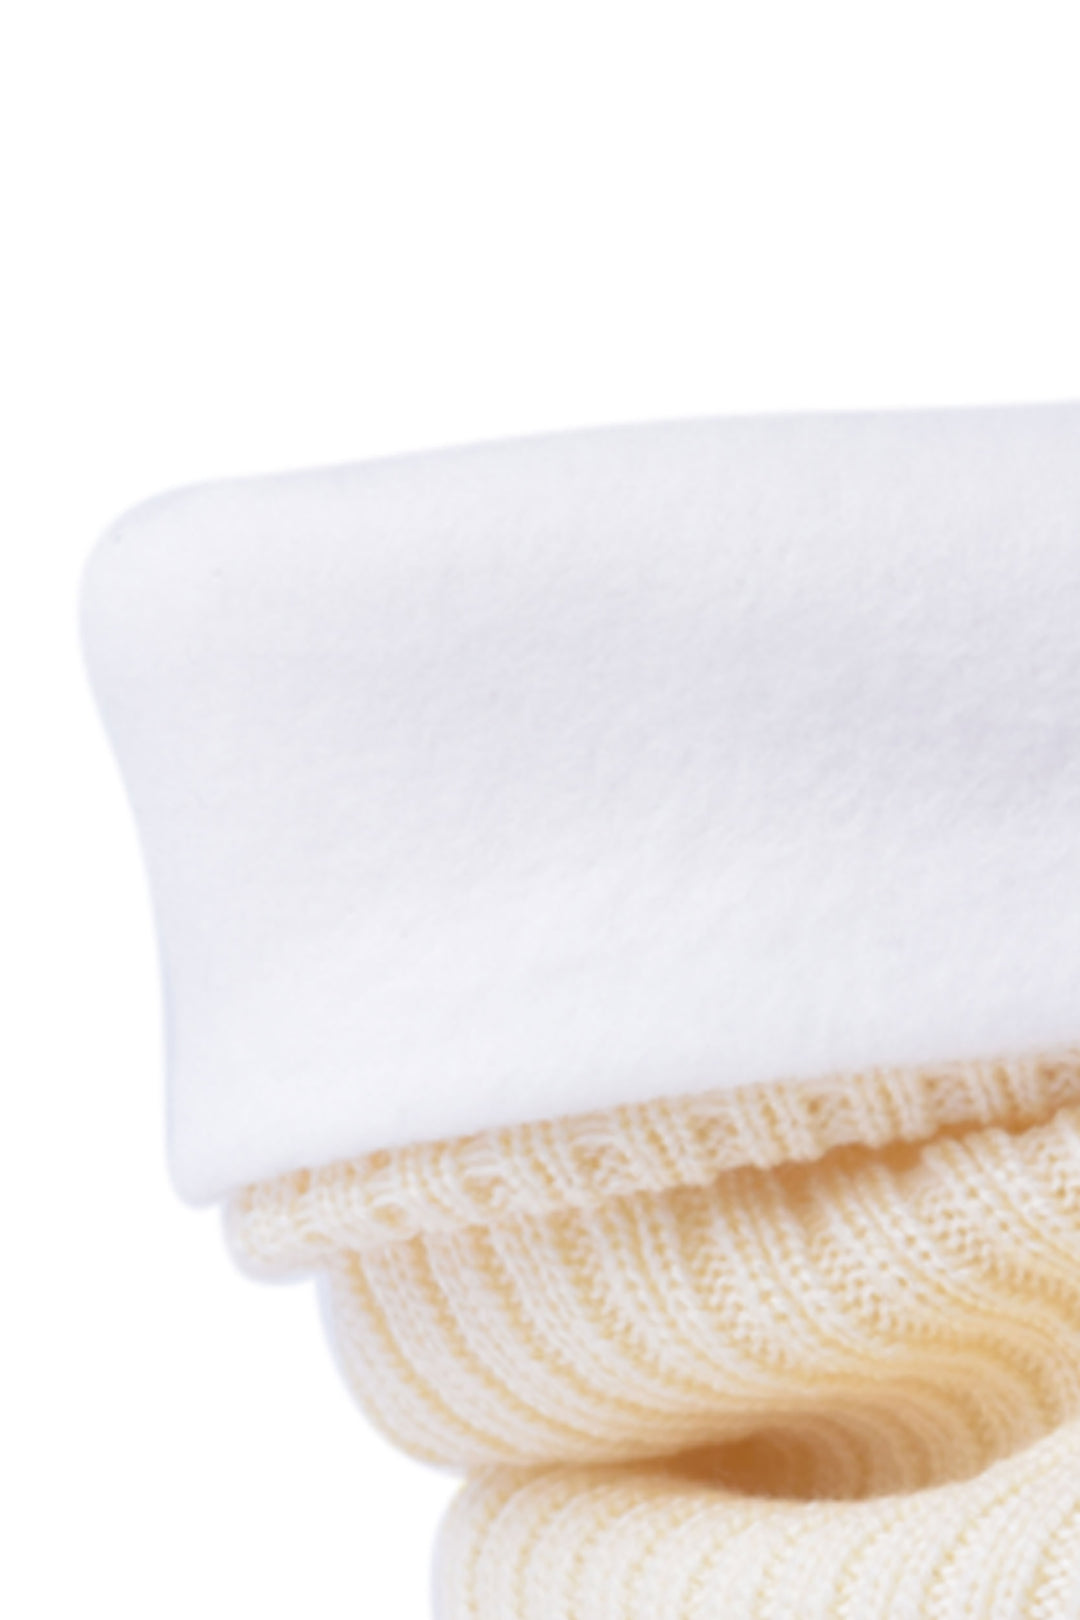 Fleece Lined Knit Neck Warmer [Whistler series] [Baby]